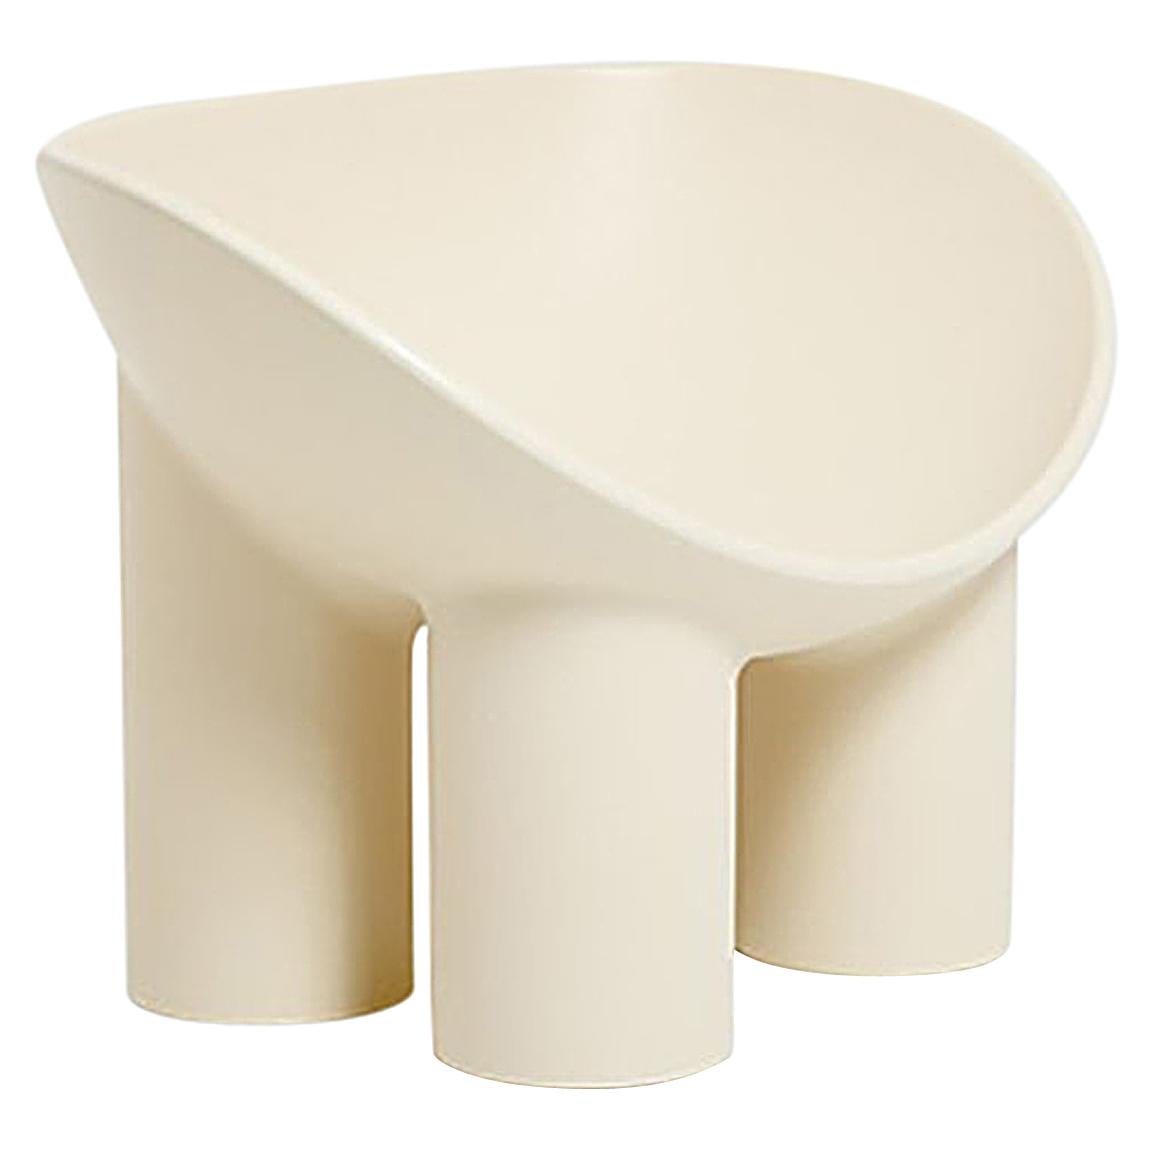 Faye Toogood Cream Contemporary Roly Poly Chair Fibreglass  For Sale